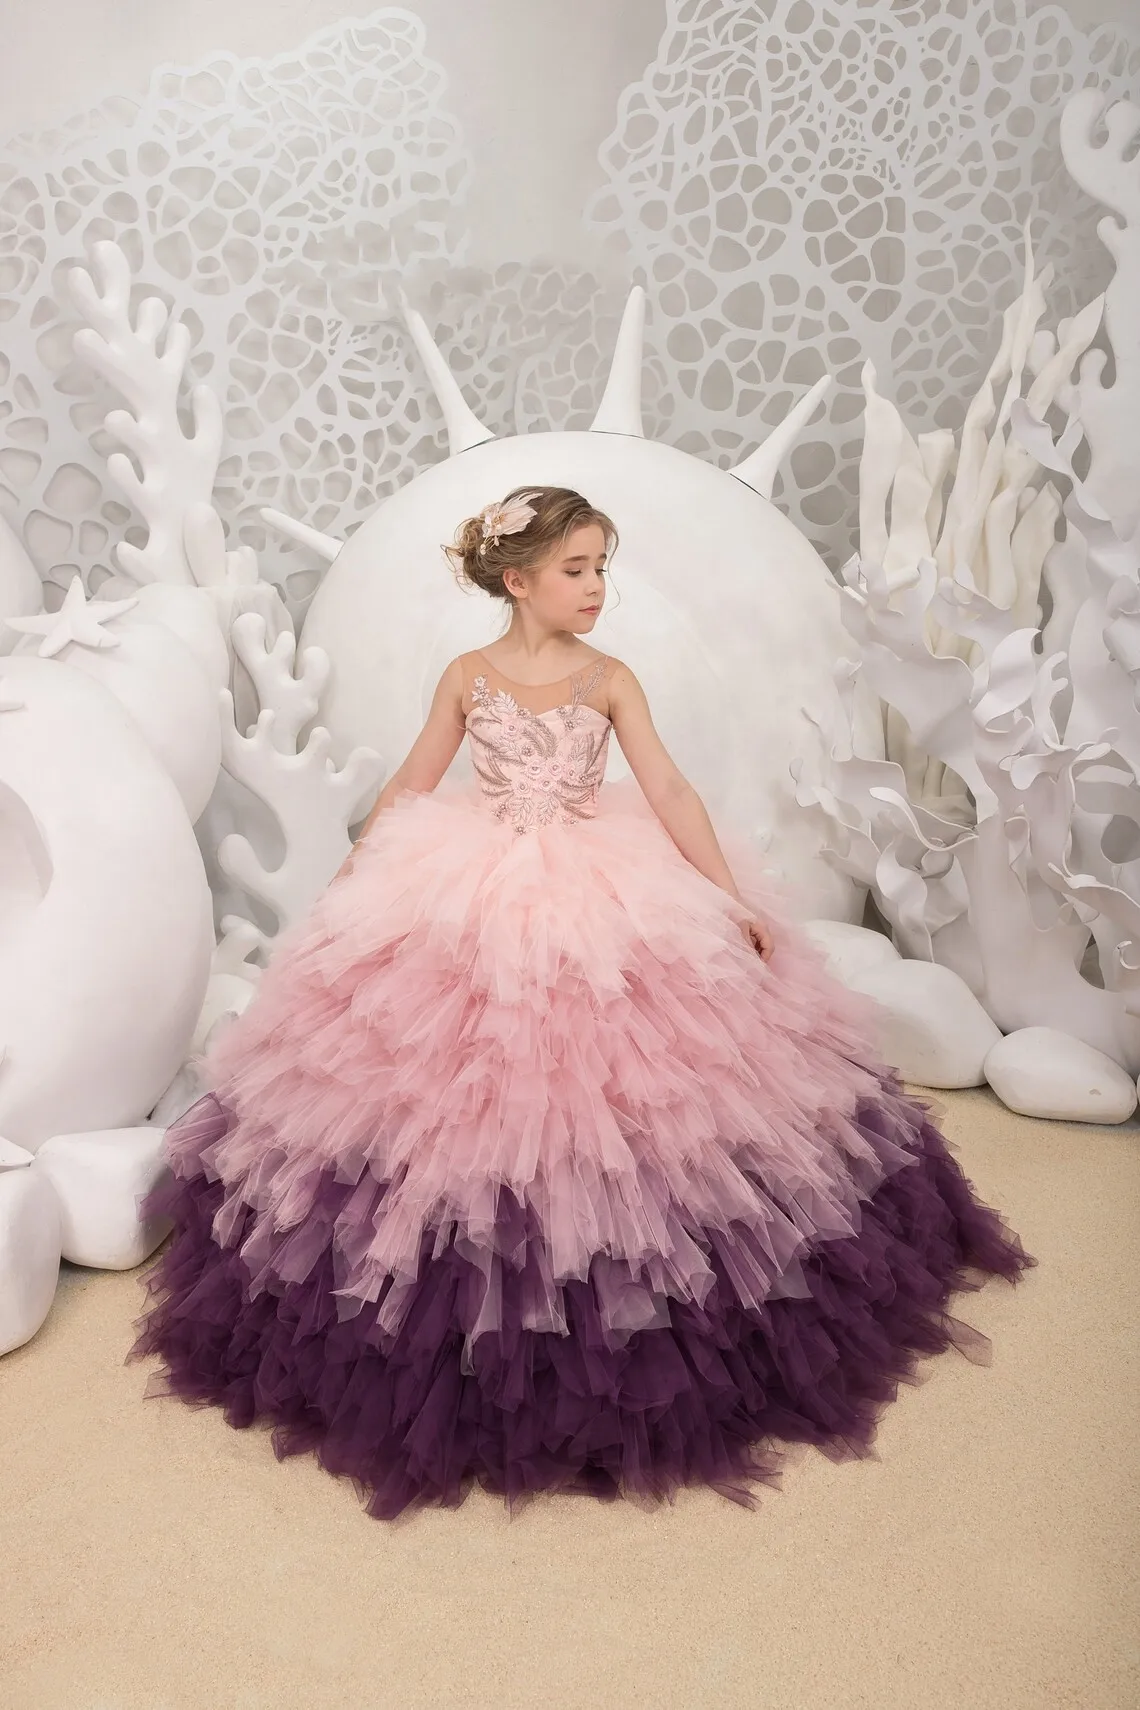 Puffy Long Pink Flower Girl Dresses Tulle Ruffles Applique Sleeveless Wedding Princess Birthday Party First Communion Gowns